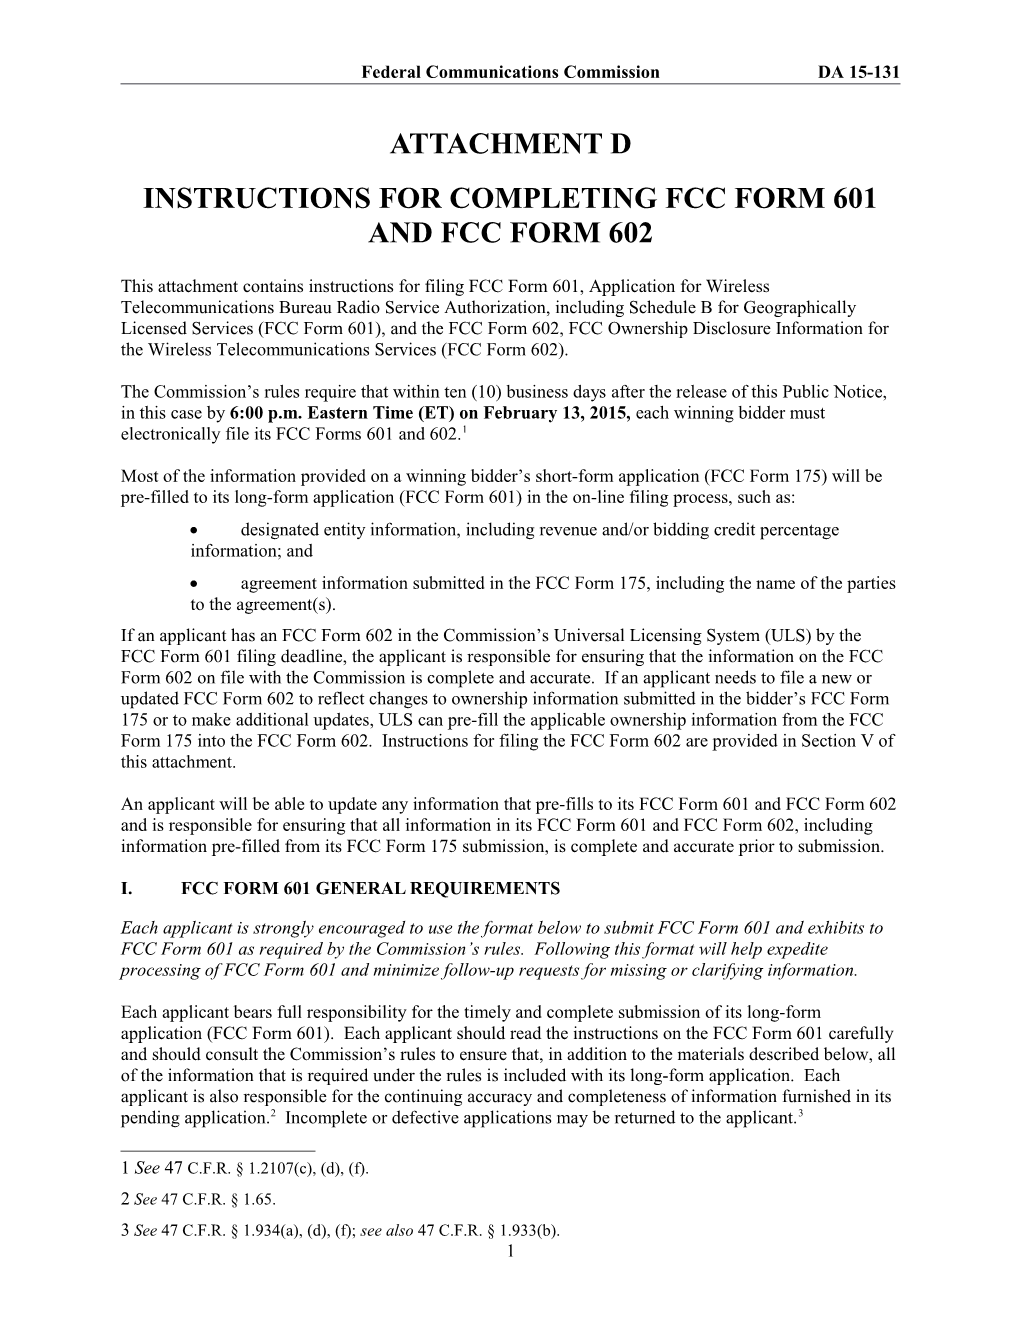 Instructions for Completing Fcc Form 601 and Fcc Form 602